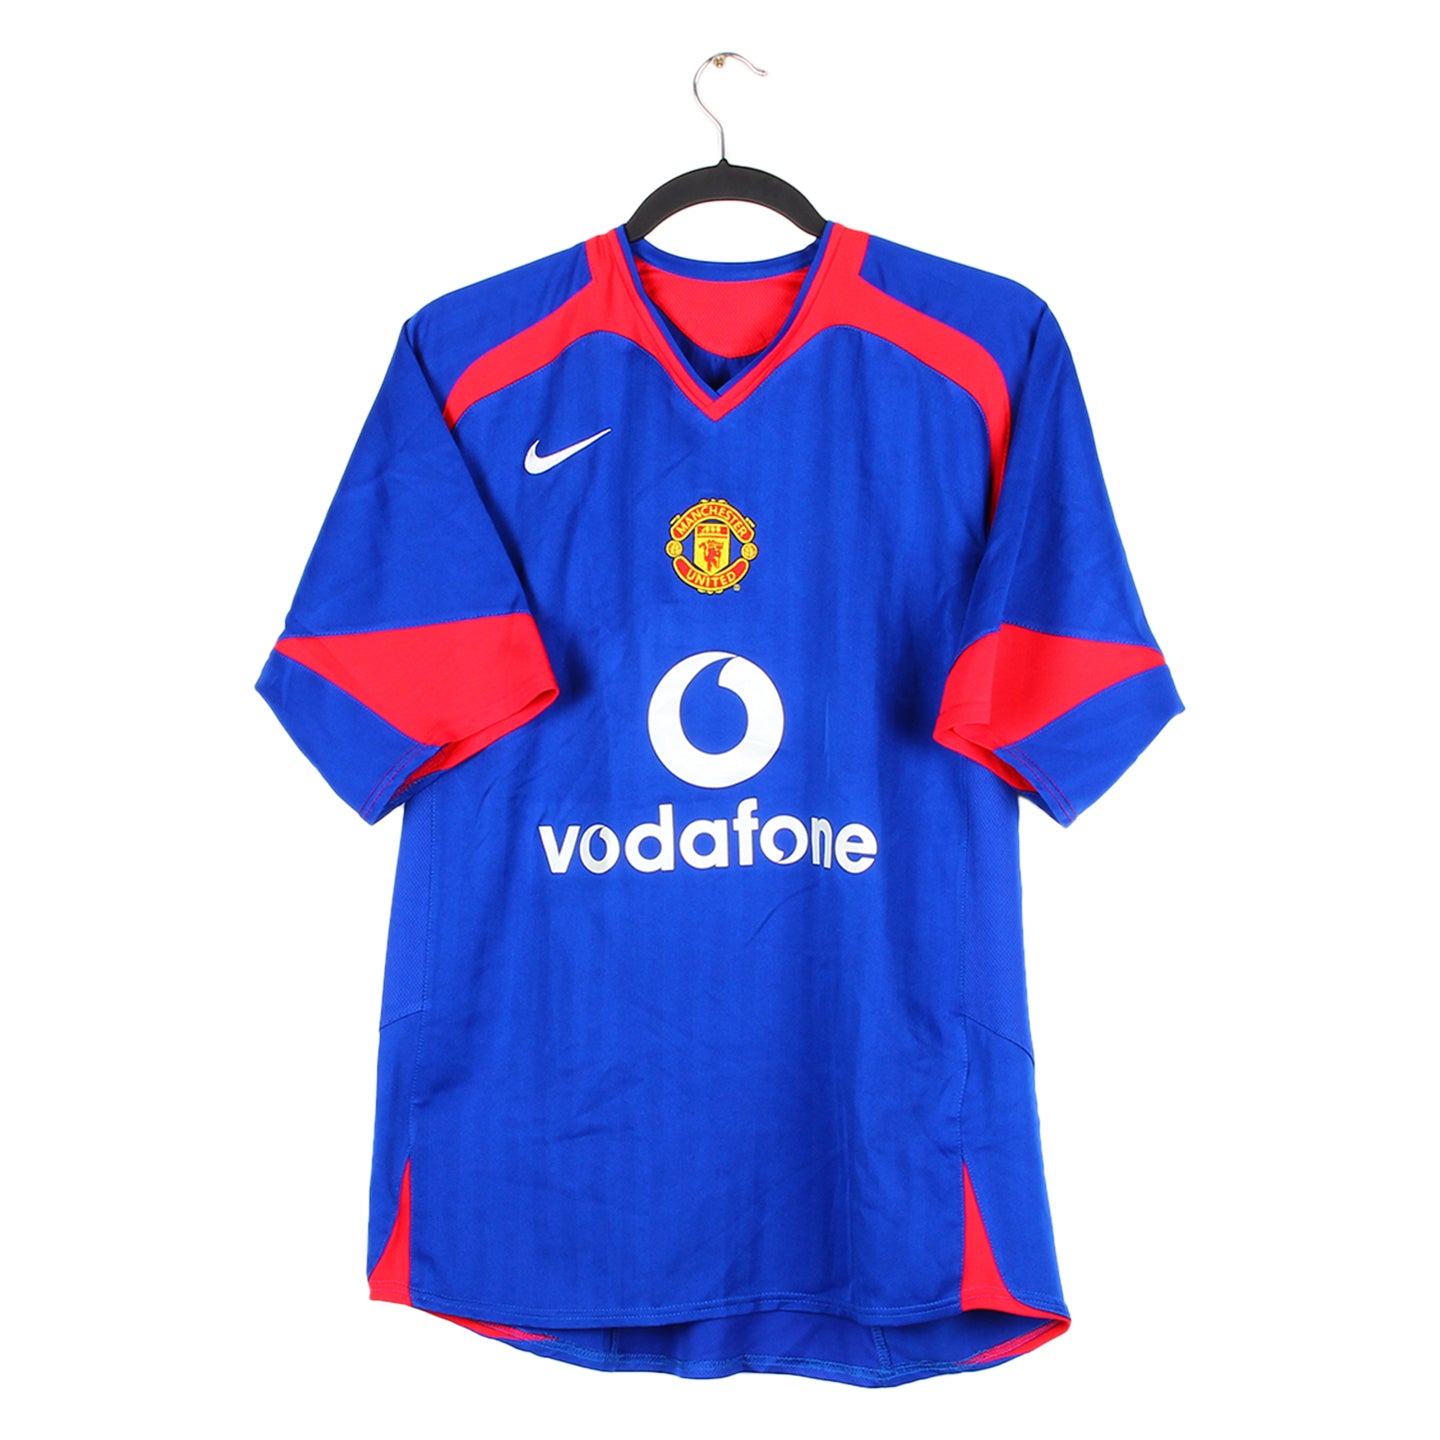 maillot manchester united 2005